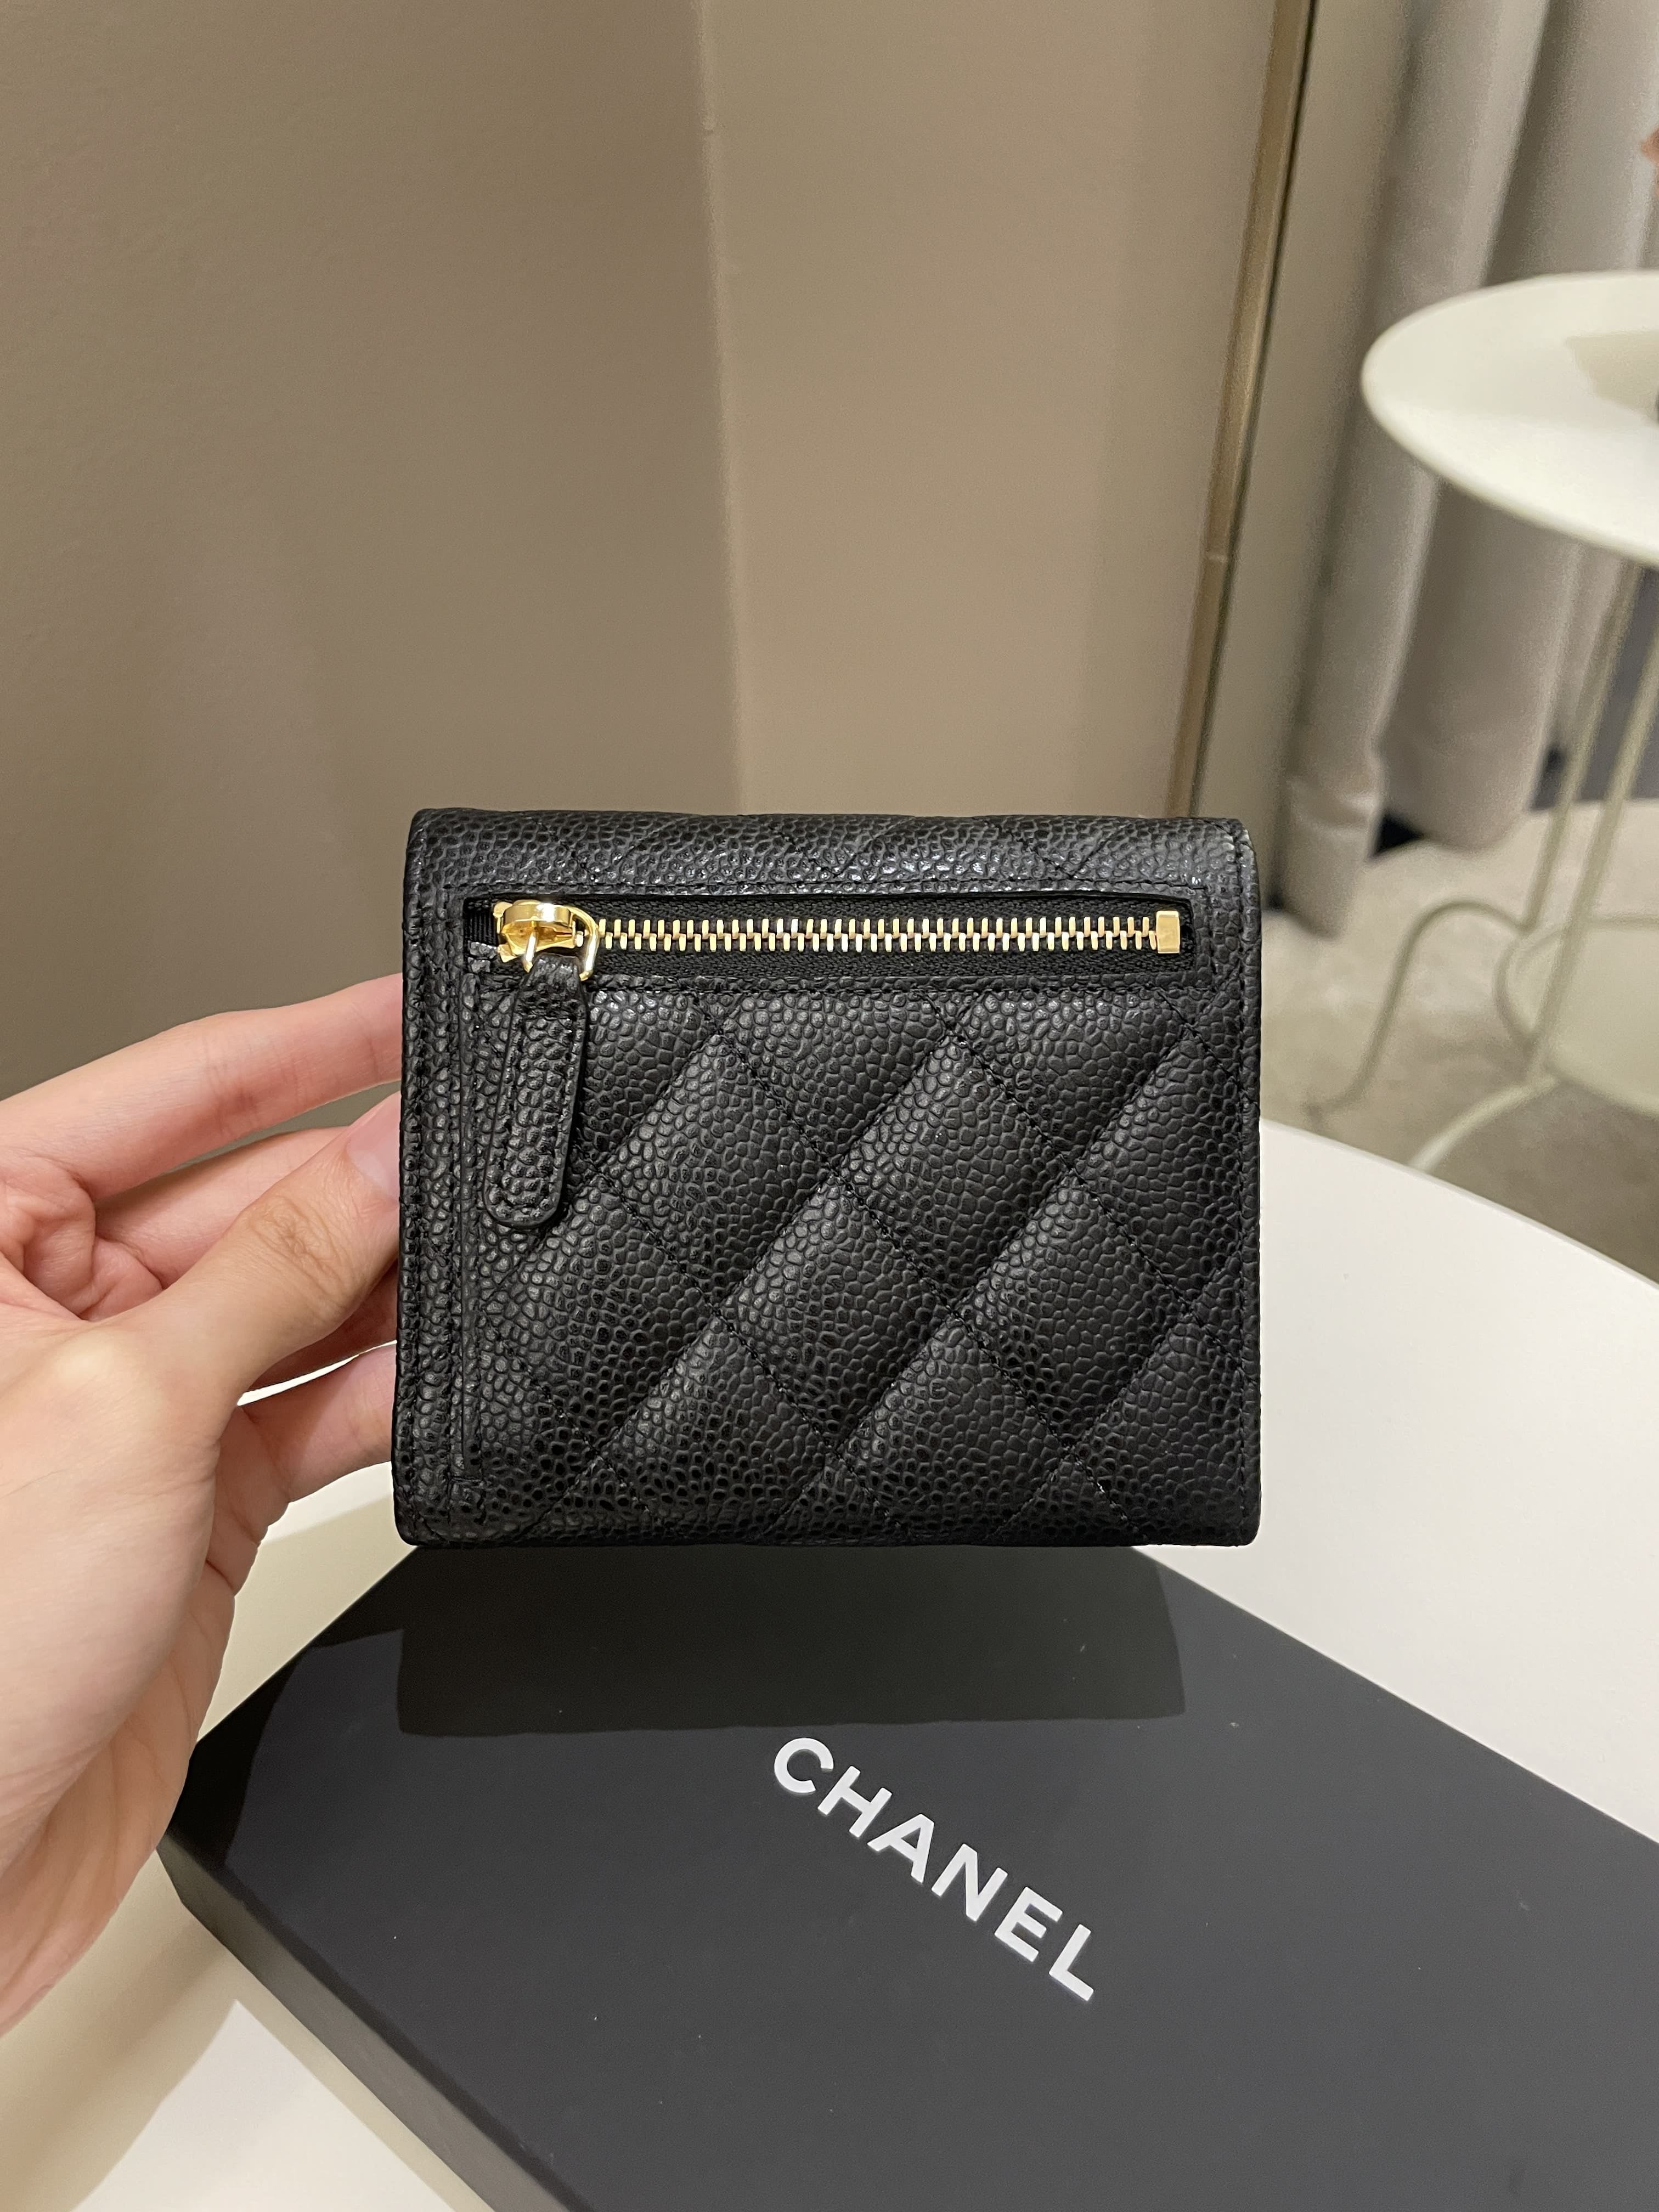 Chanel Credit Card Case